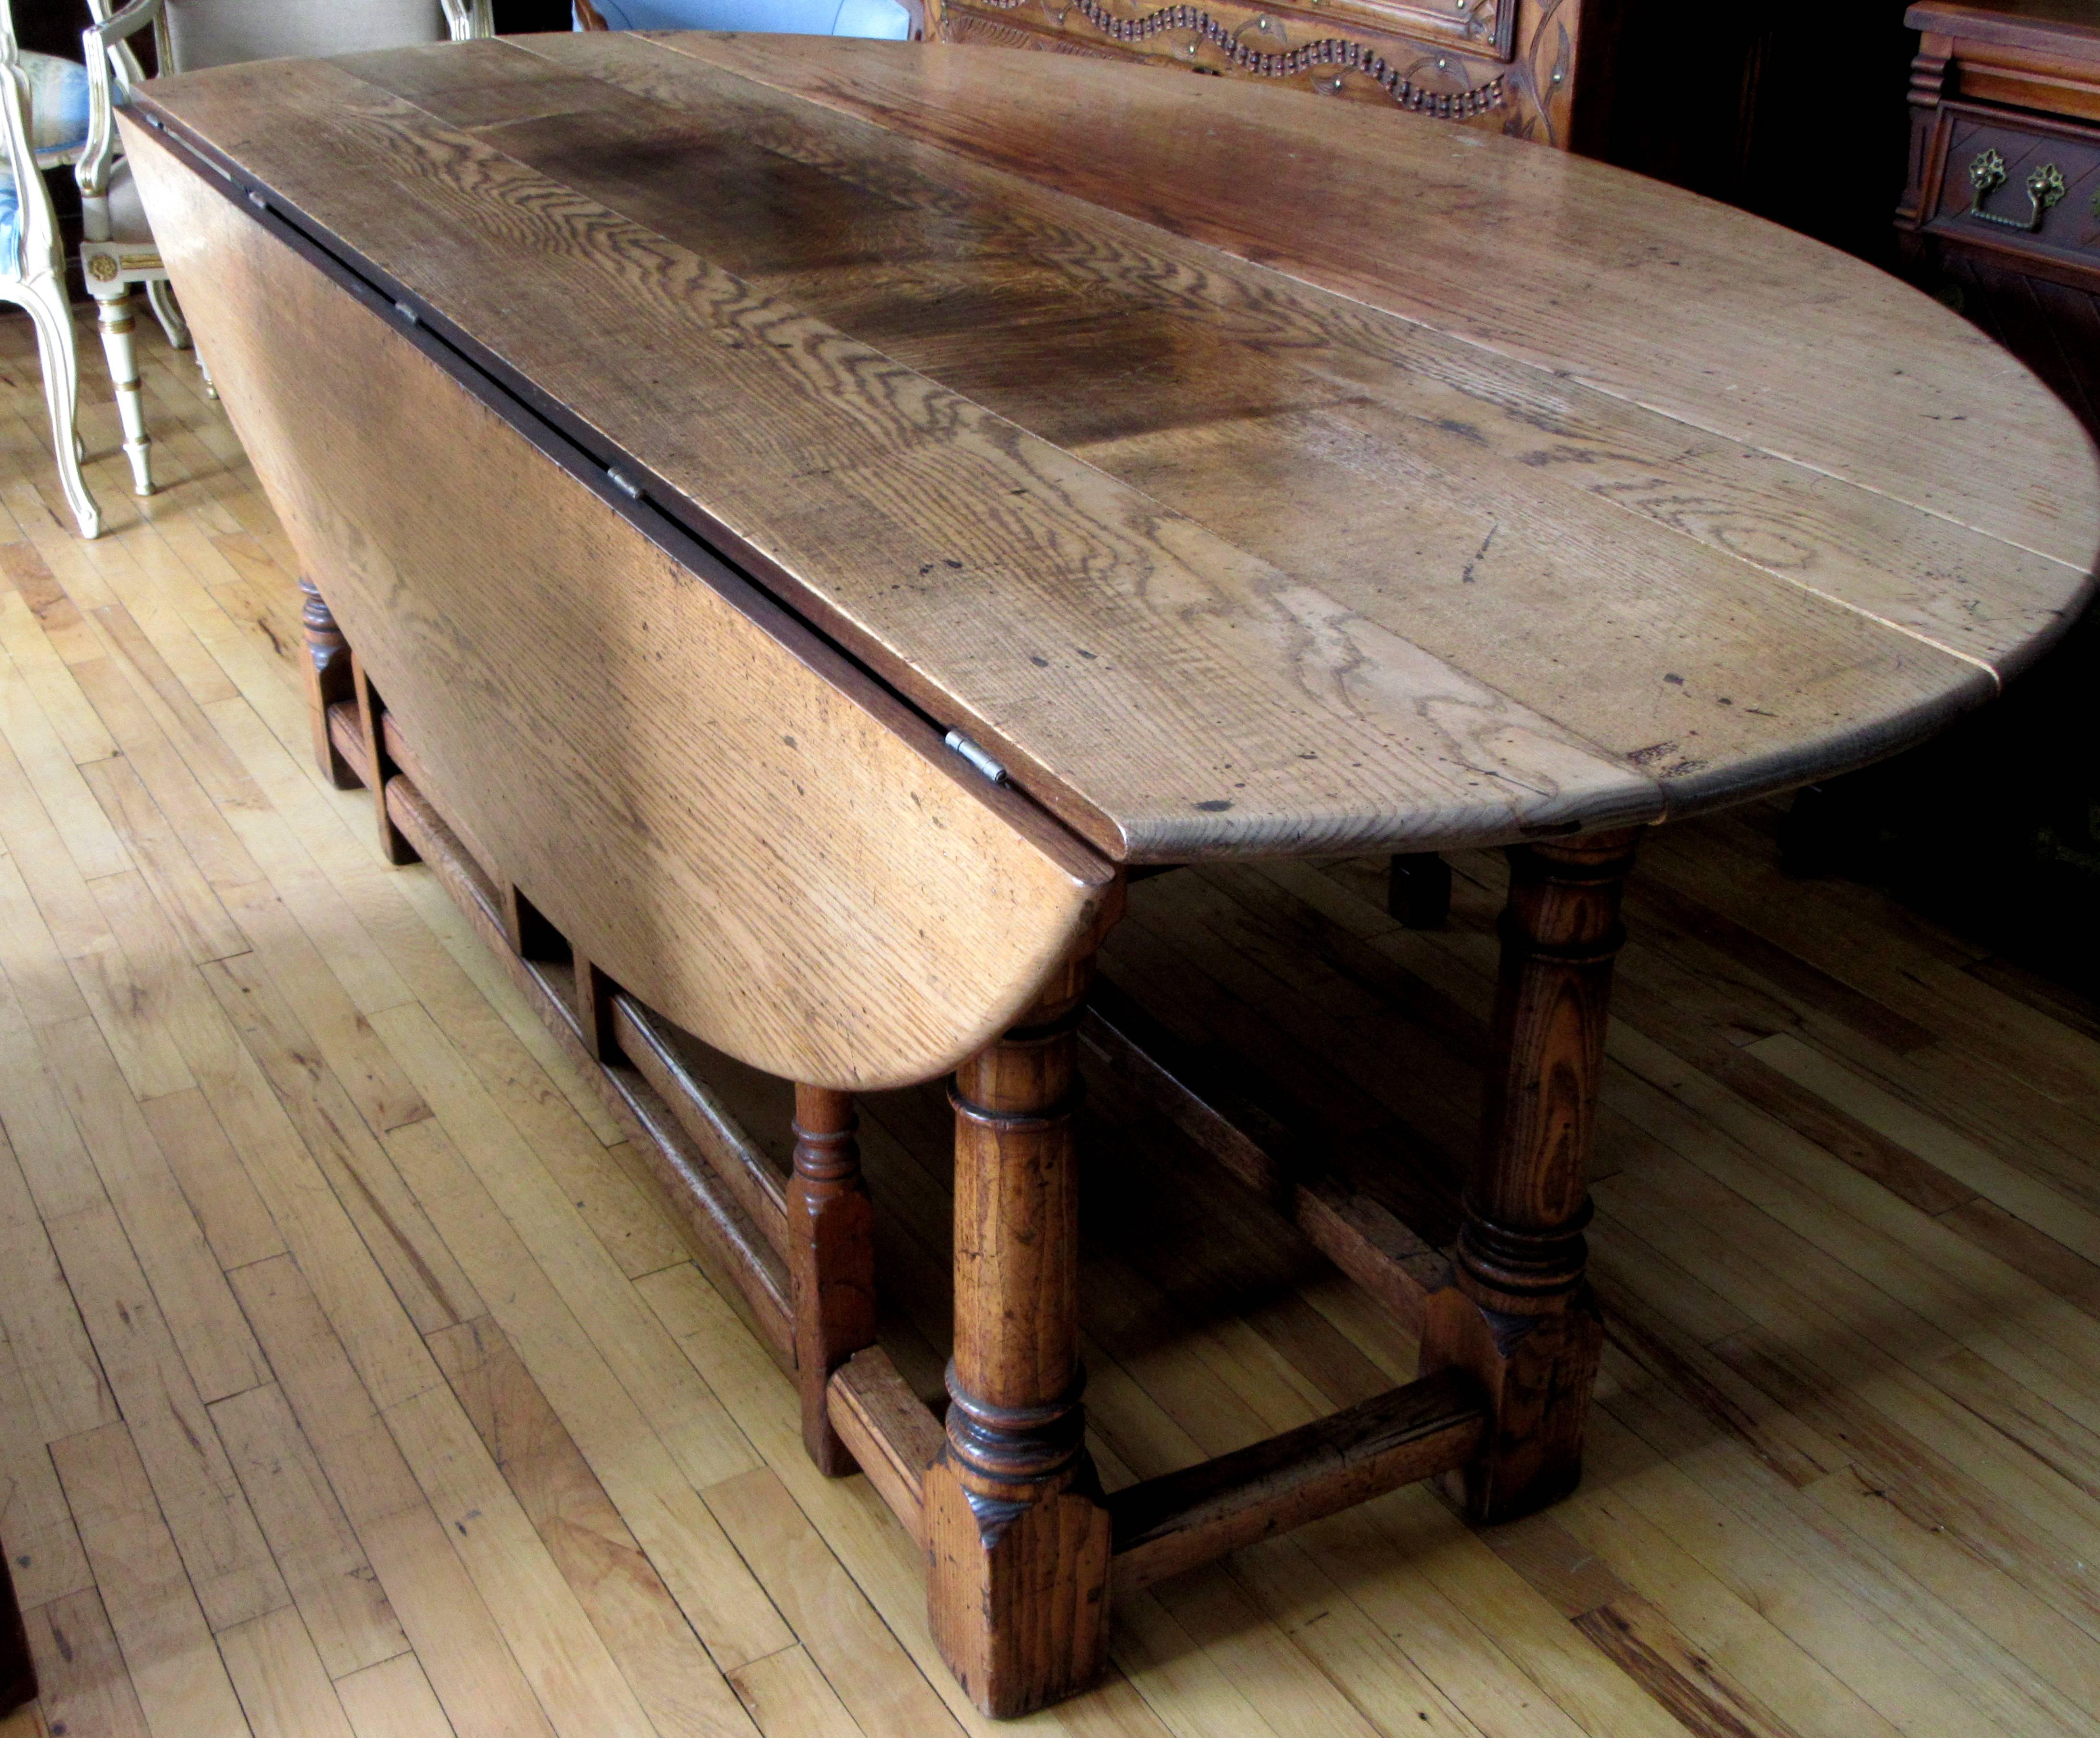 19th century English oak double gateleg hunt table, the rectangular top with rounded ends flanked with oval or D-shaped drops, above a scalloped apron and rising on turned legs conjoined by the box stretcher.